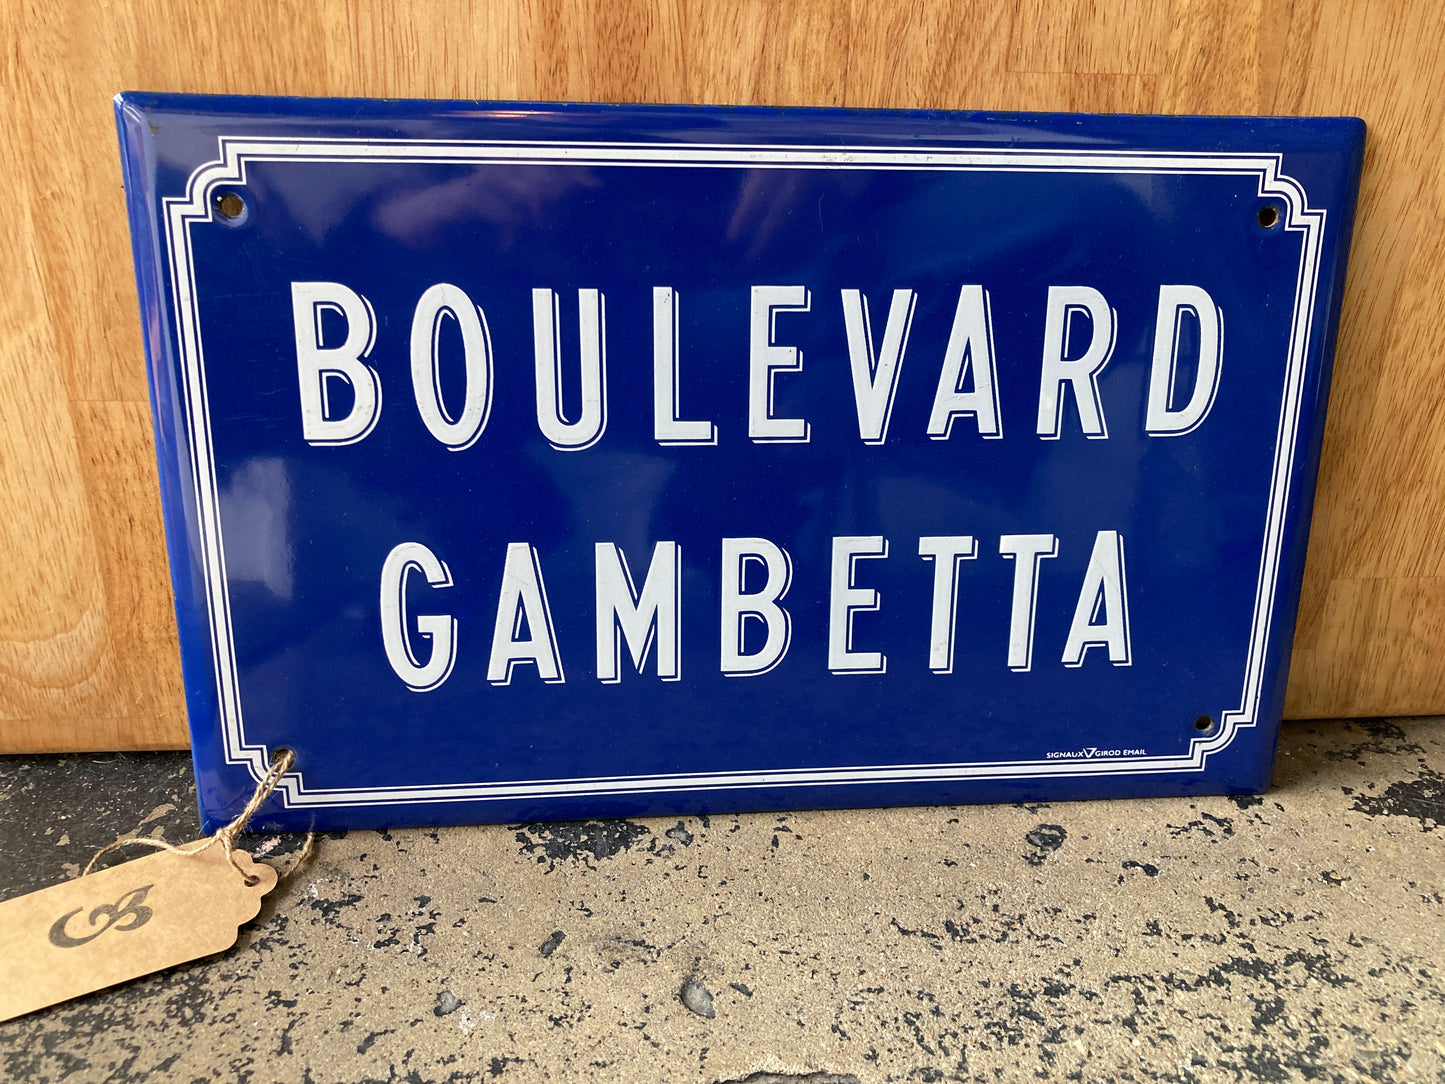 French Street Sign